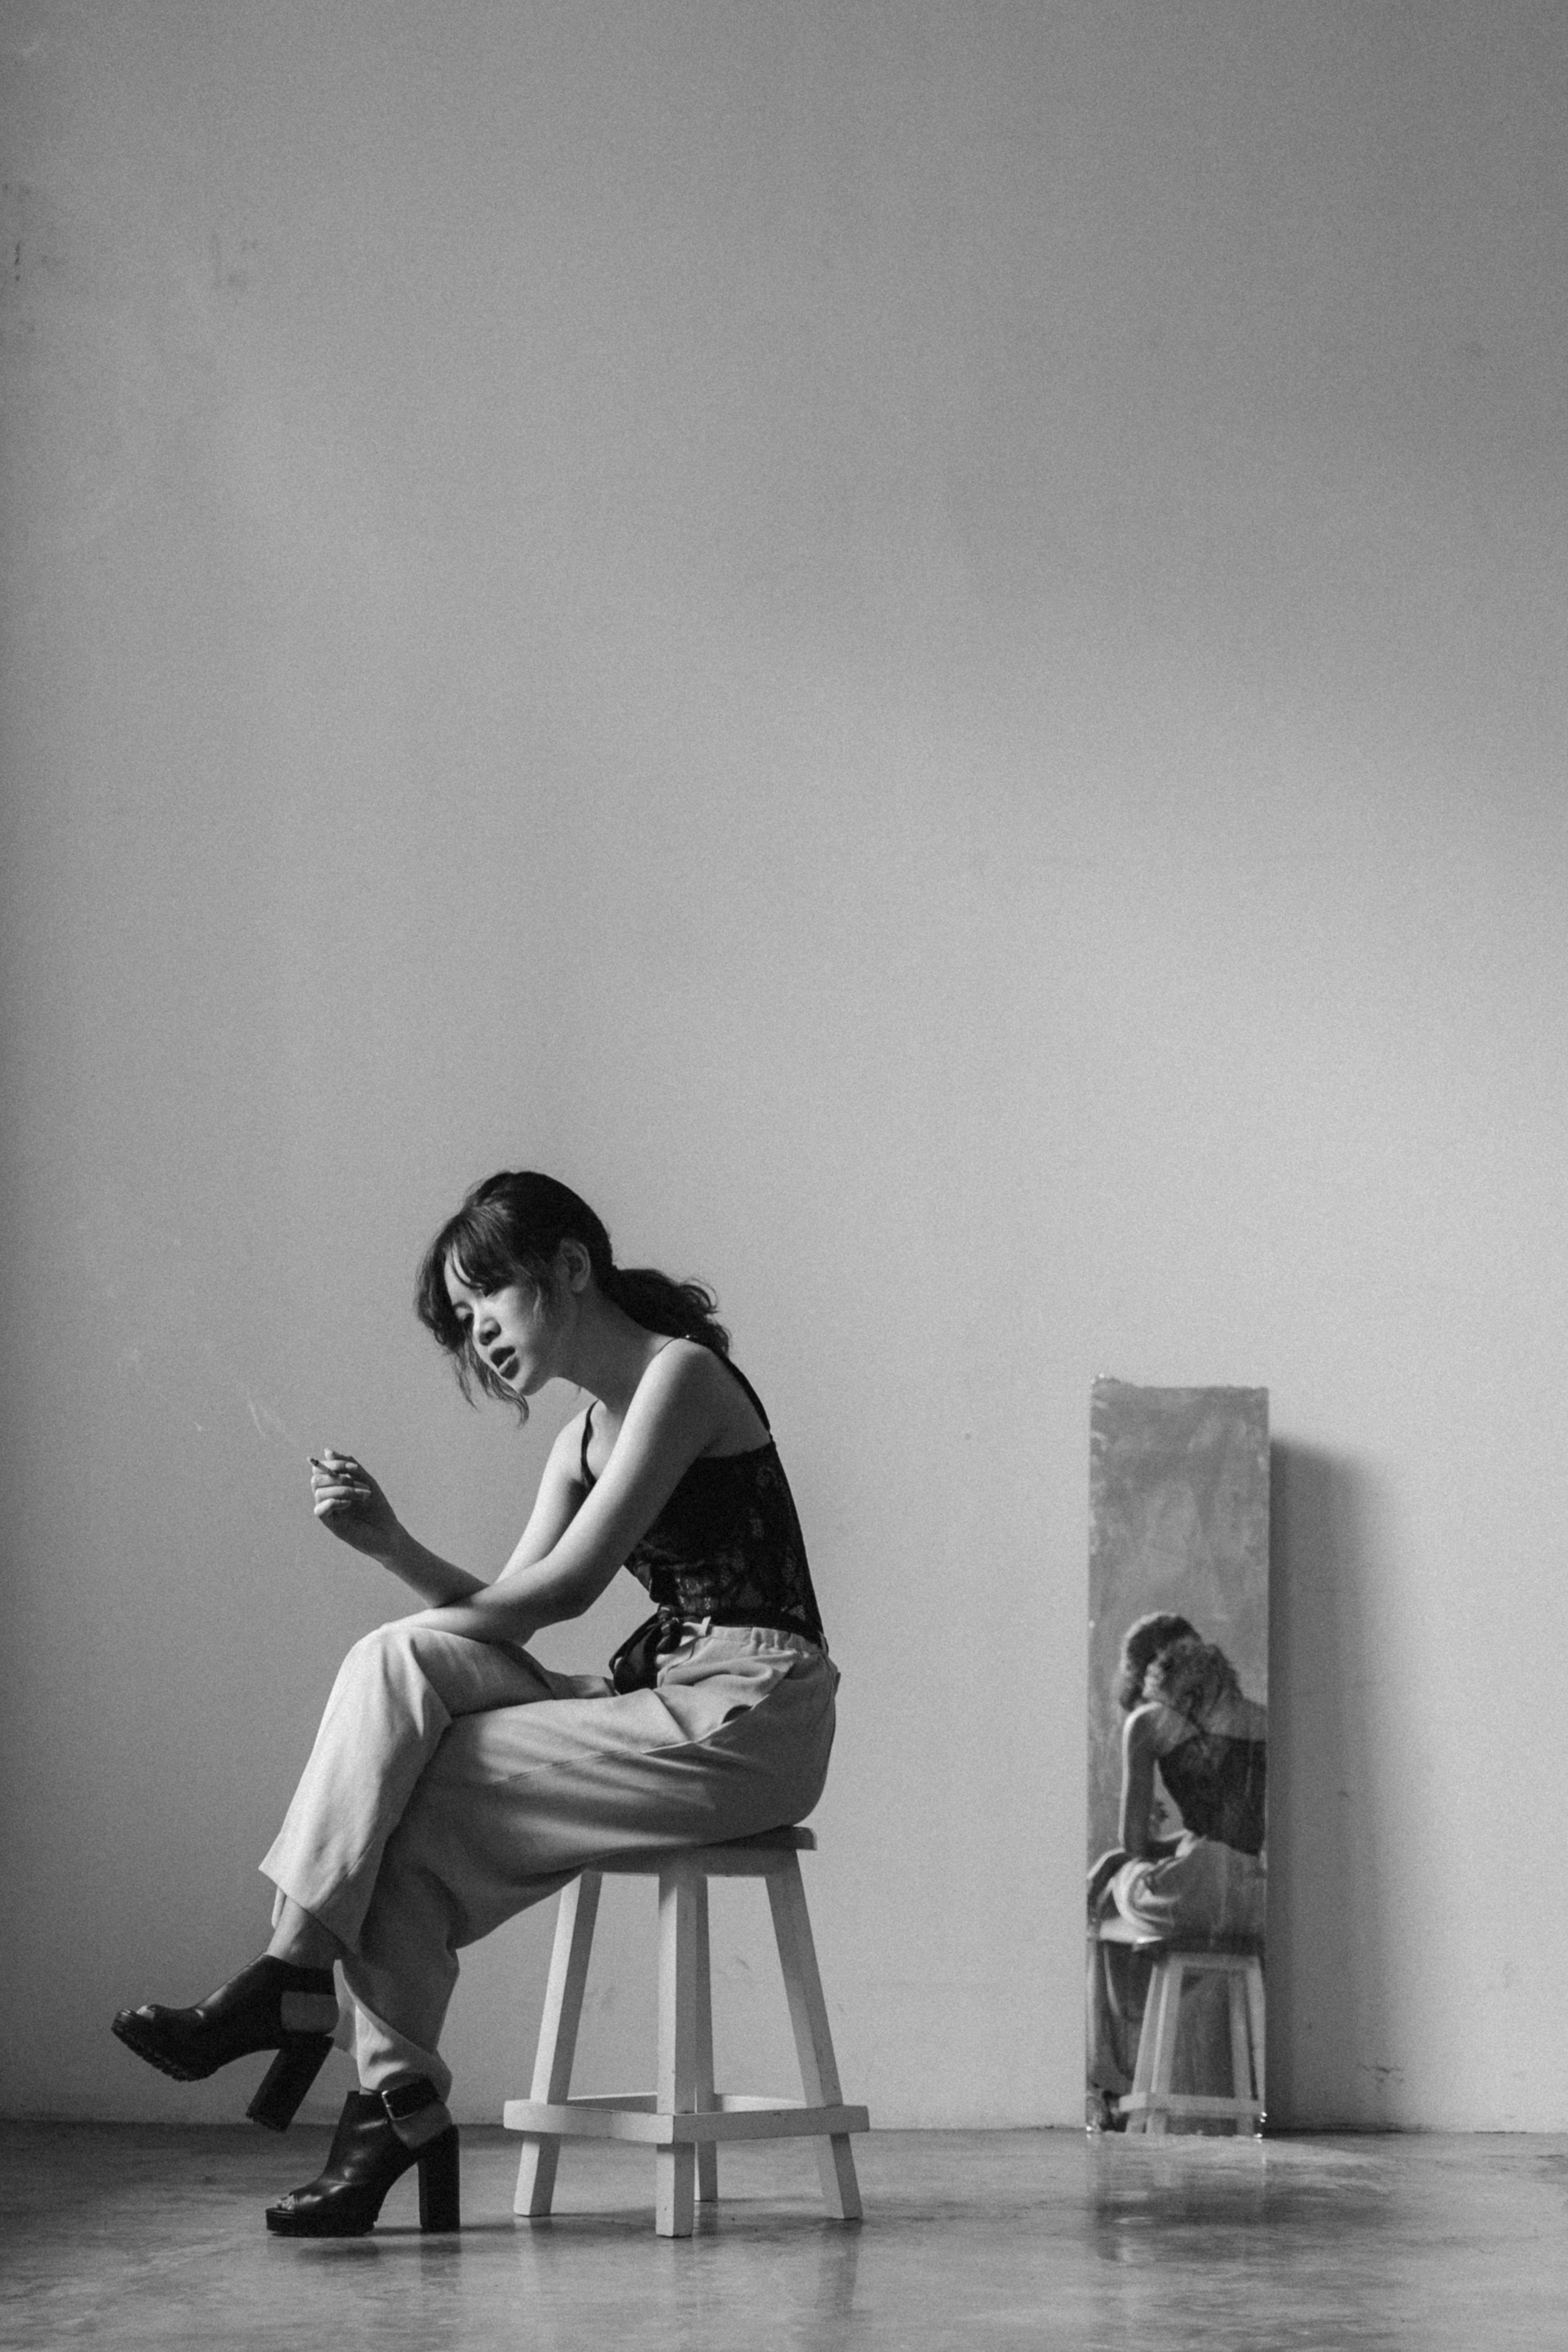 woman sitting on a wooden chair while smoking cigarette